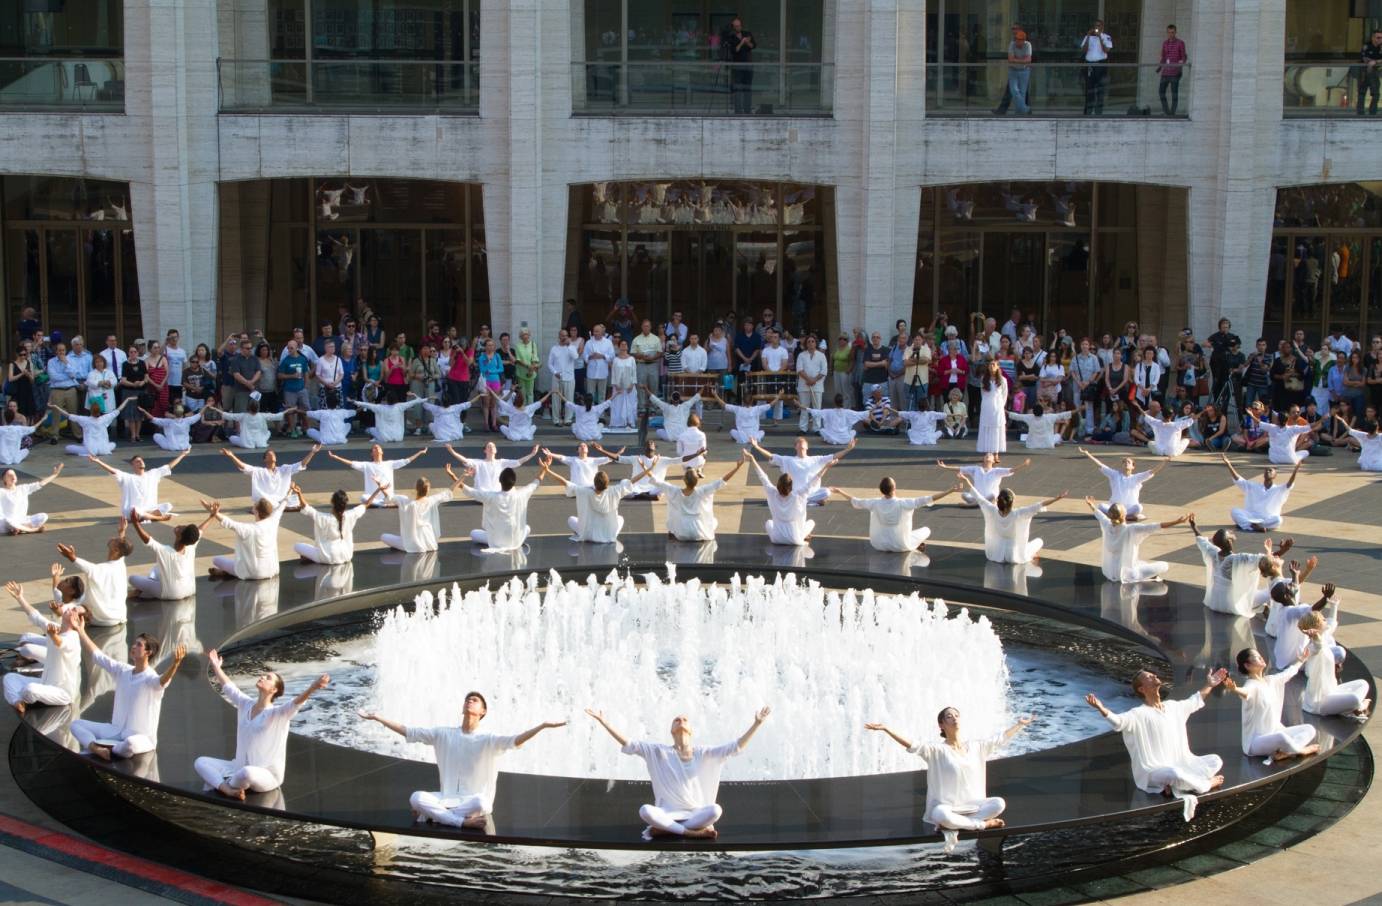 Table of Silence in Lincoln Center